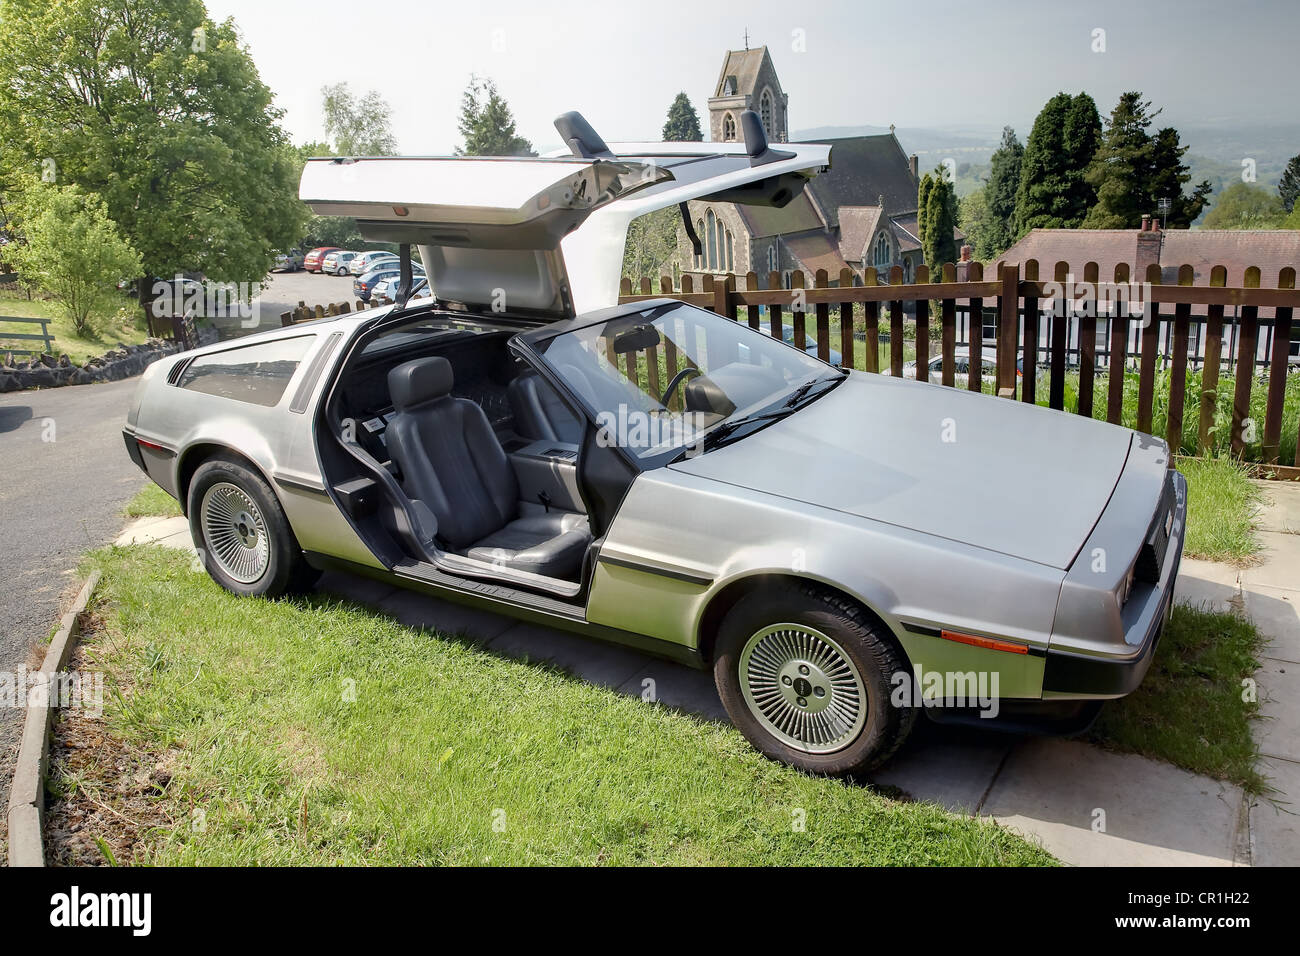 The DeLorean DMC-12 from the early 1980's made famous in the film 'back to the future'. Stock Photo